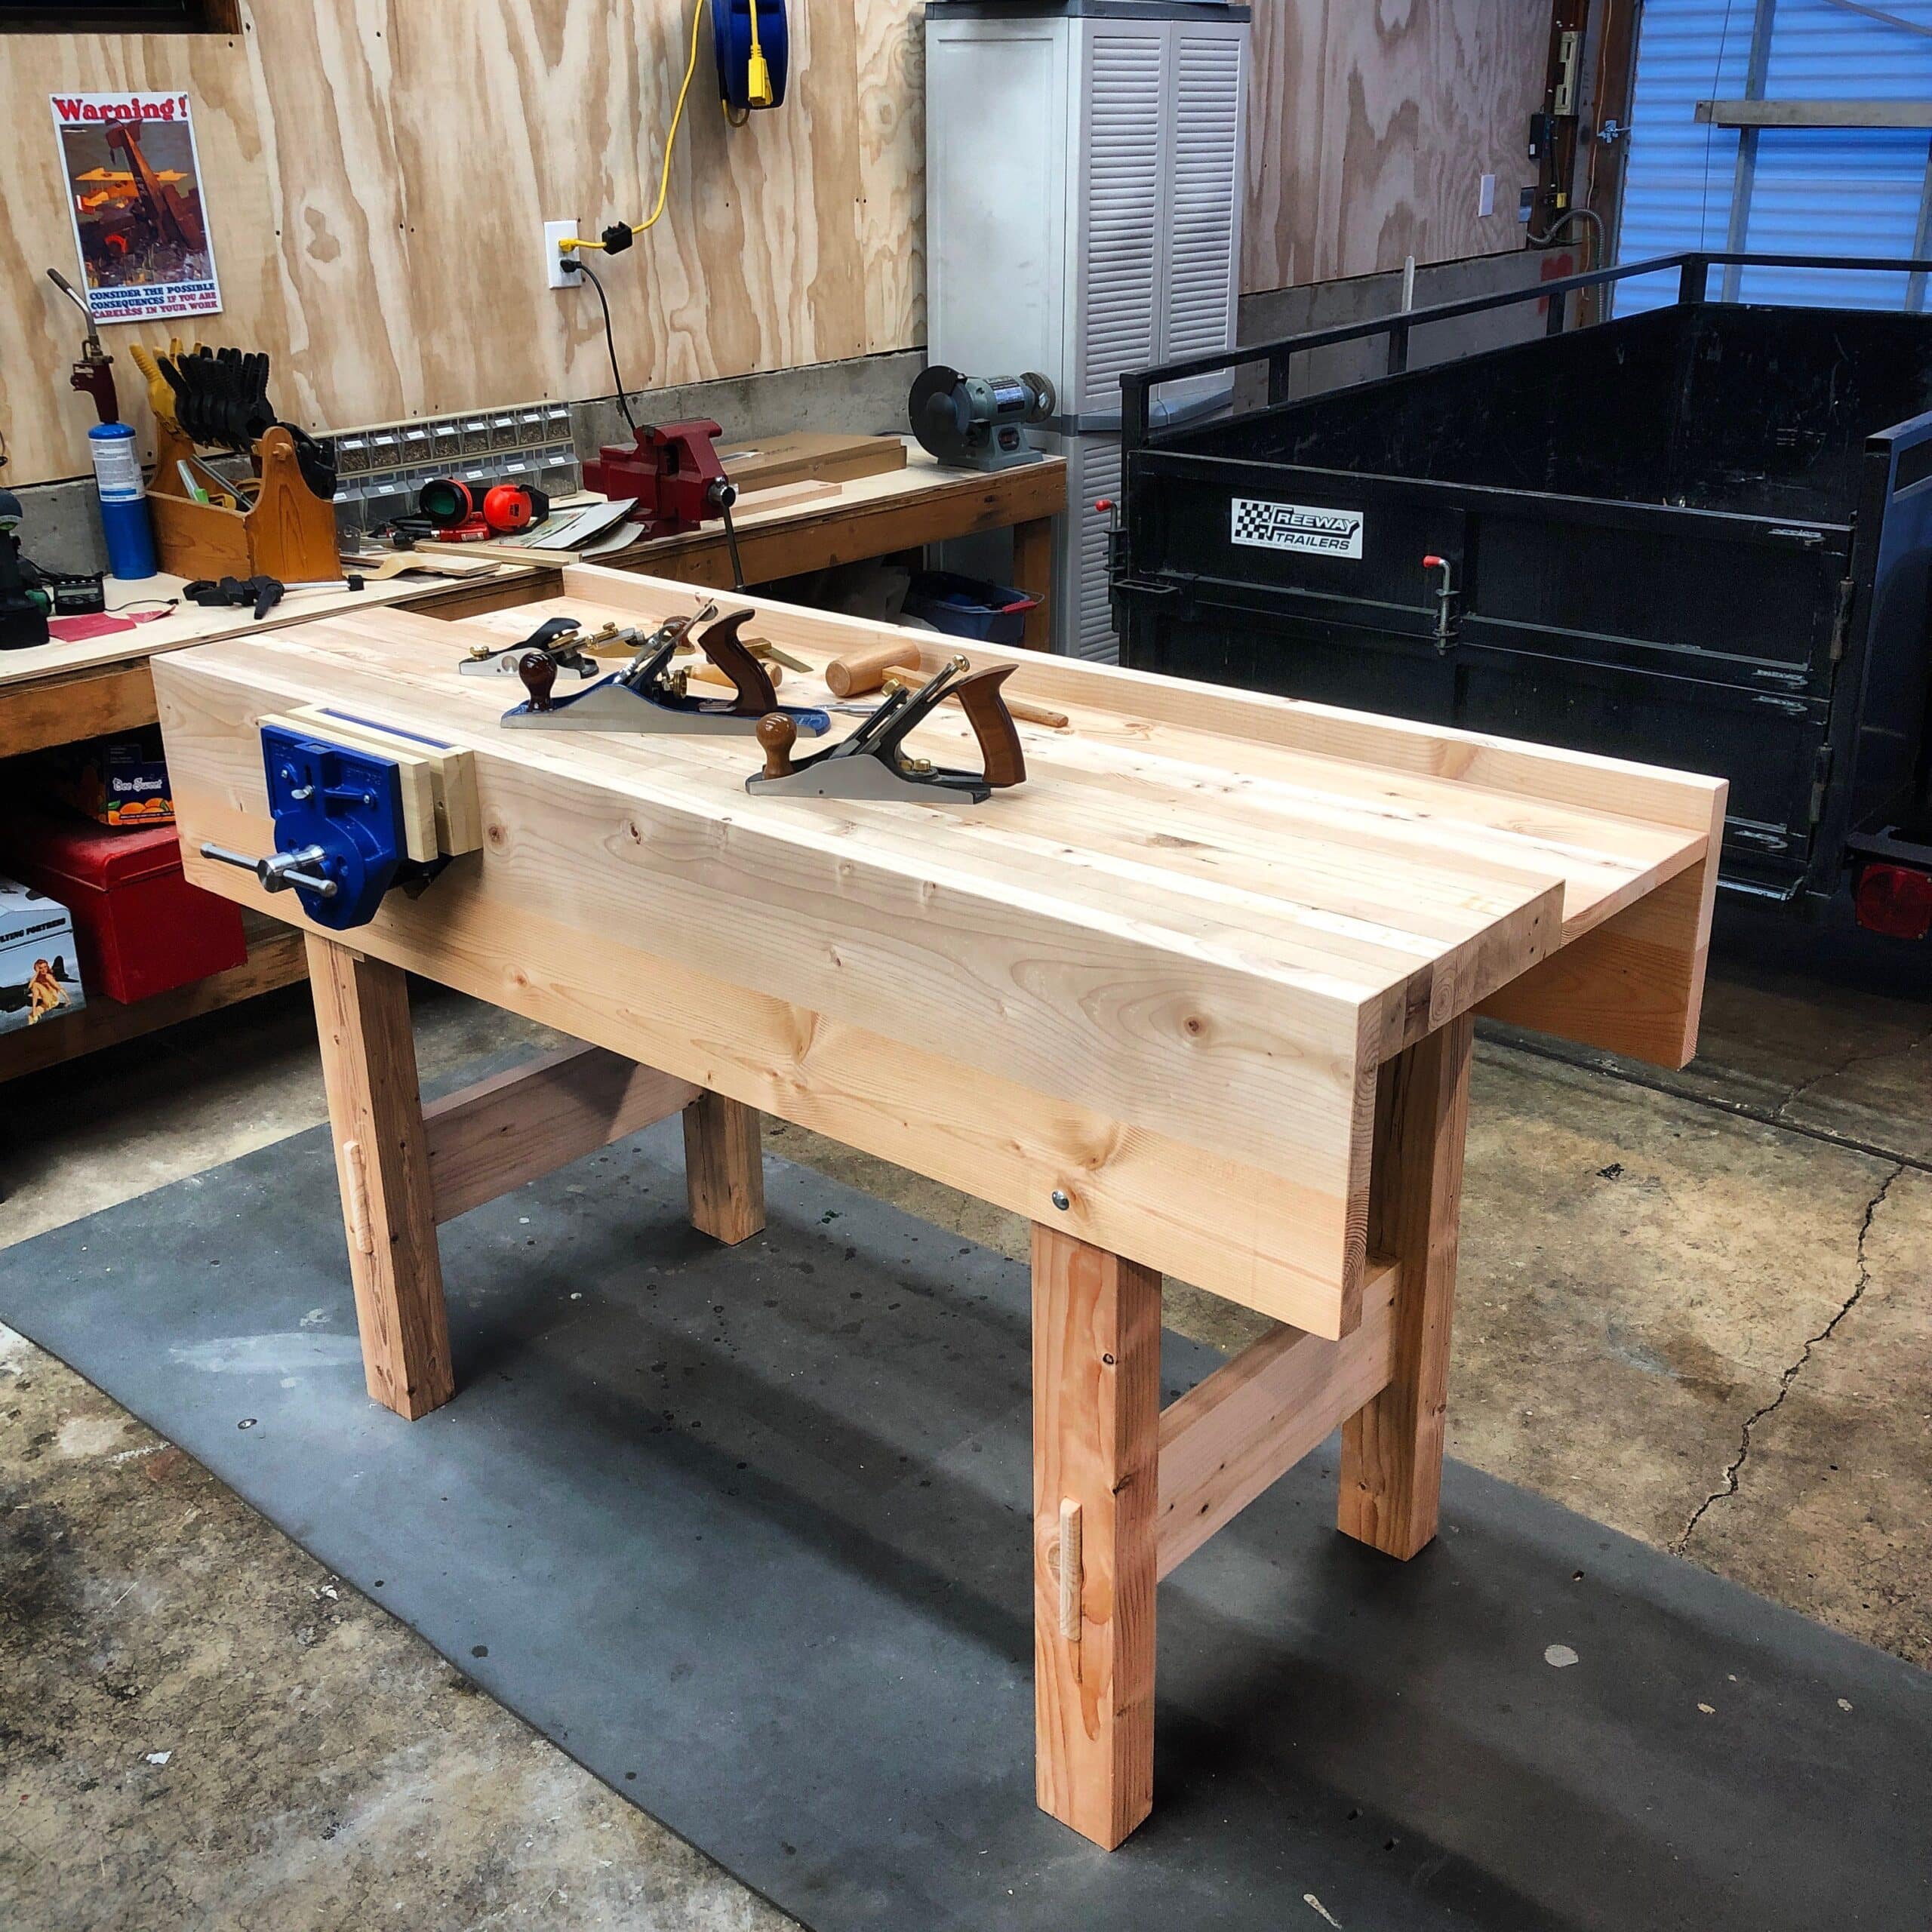 Here's my version of Paul's latest design. I stayed true to the design, used as much salvage fir as I could for the top from an old storage shed. The bench turned out great and I had a fun time following along the videos.